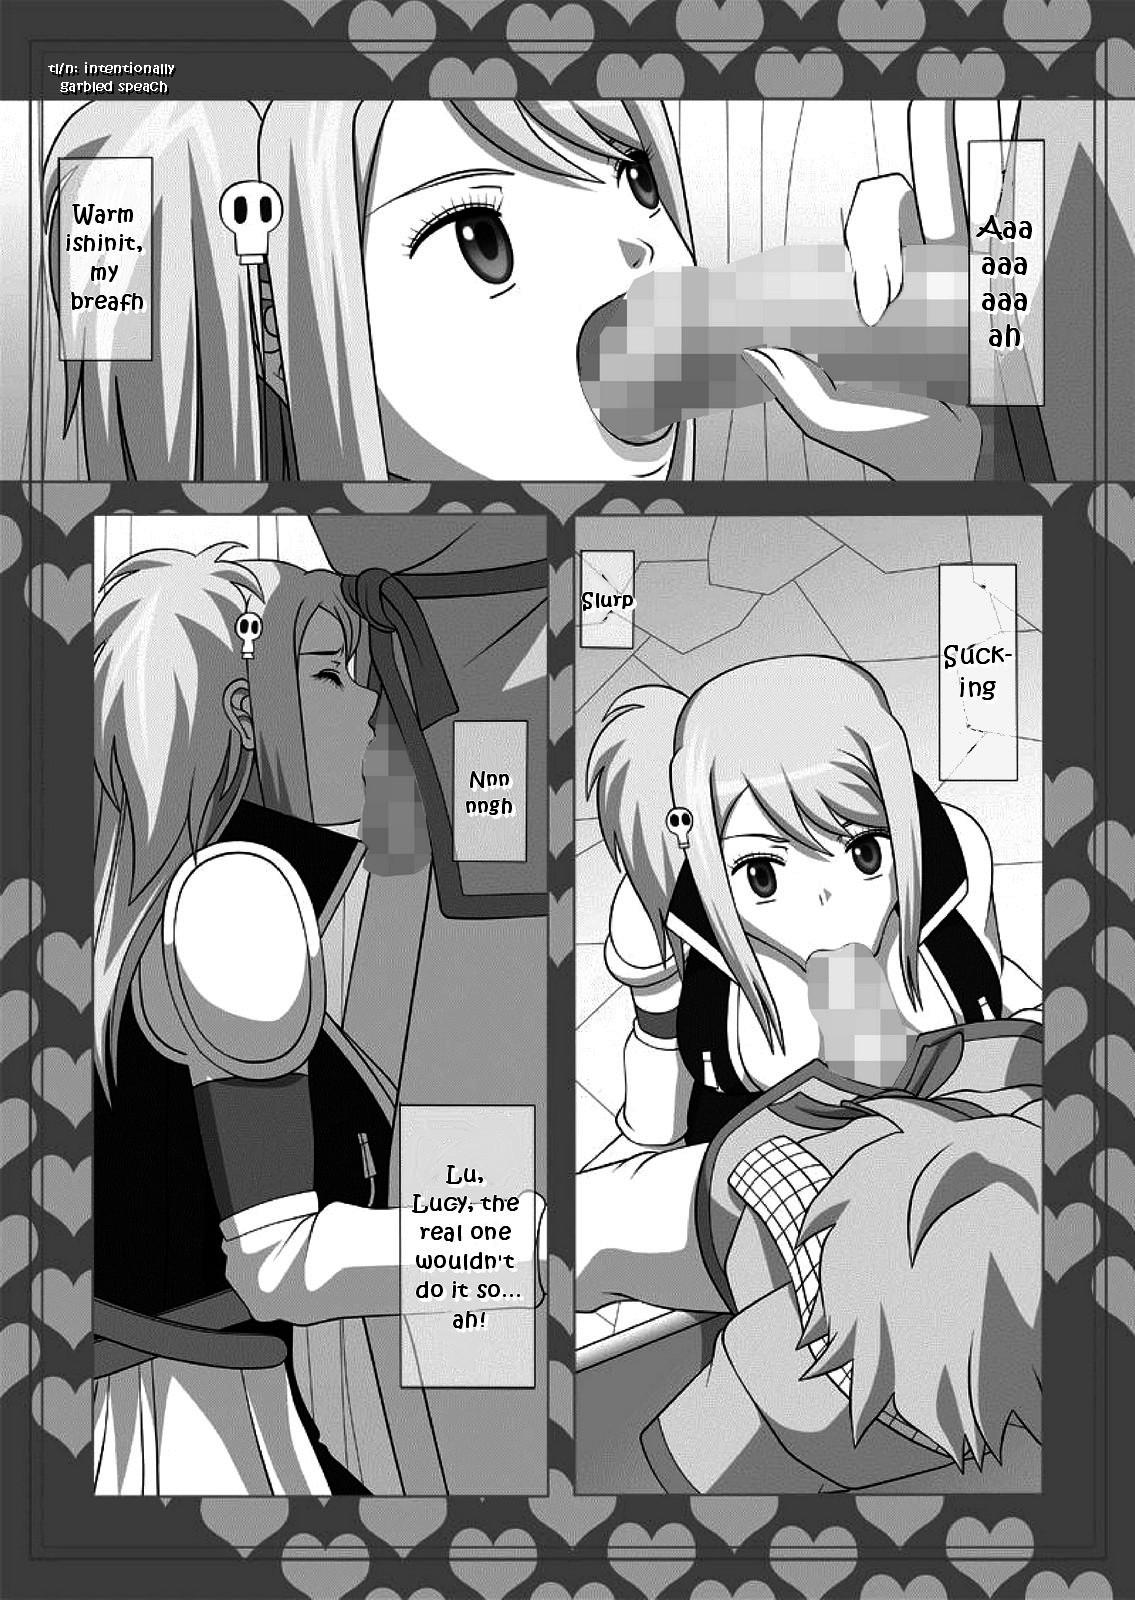 Flaquita [NAVY (Kisyuu Naoyuki)] Okuchi no Ehon Vol. 36 Sweethole -Lucy Lucy- | Picture Book of the Mouth Vol. 36 Sweethole -Lucy Lucy- Mouth is Lover (Fairy Tail) [English] [EHCOVE] [Digital] - Fairy tail Clothed - Page 6